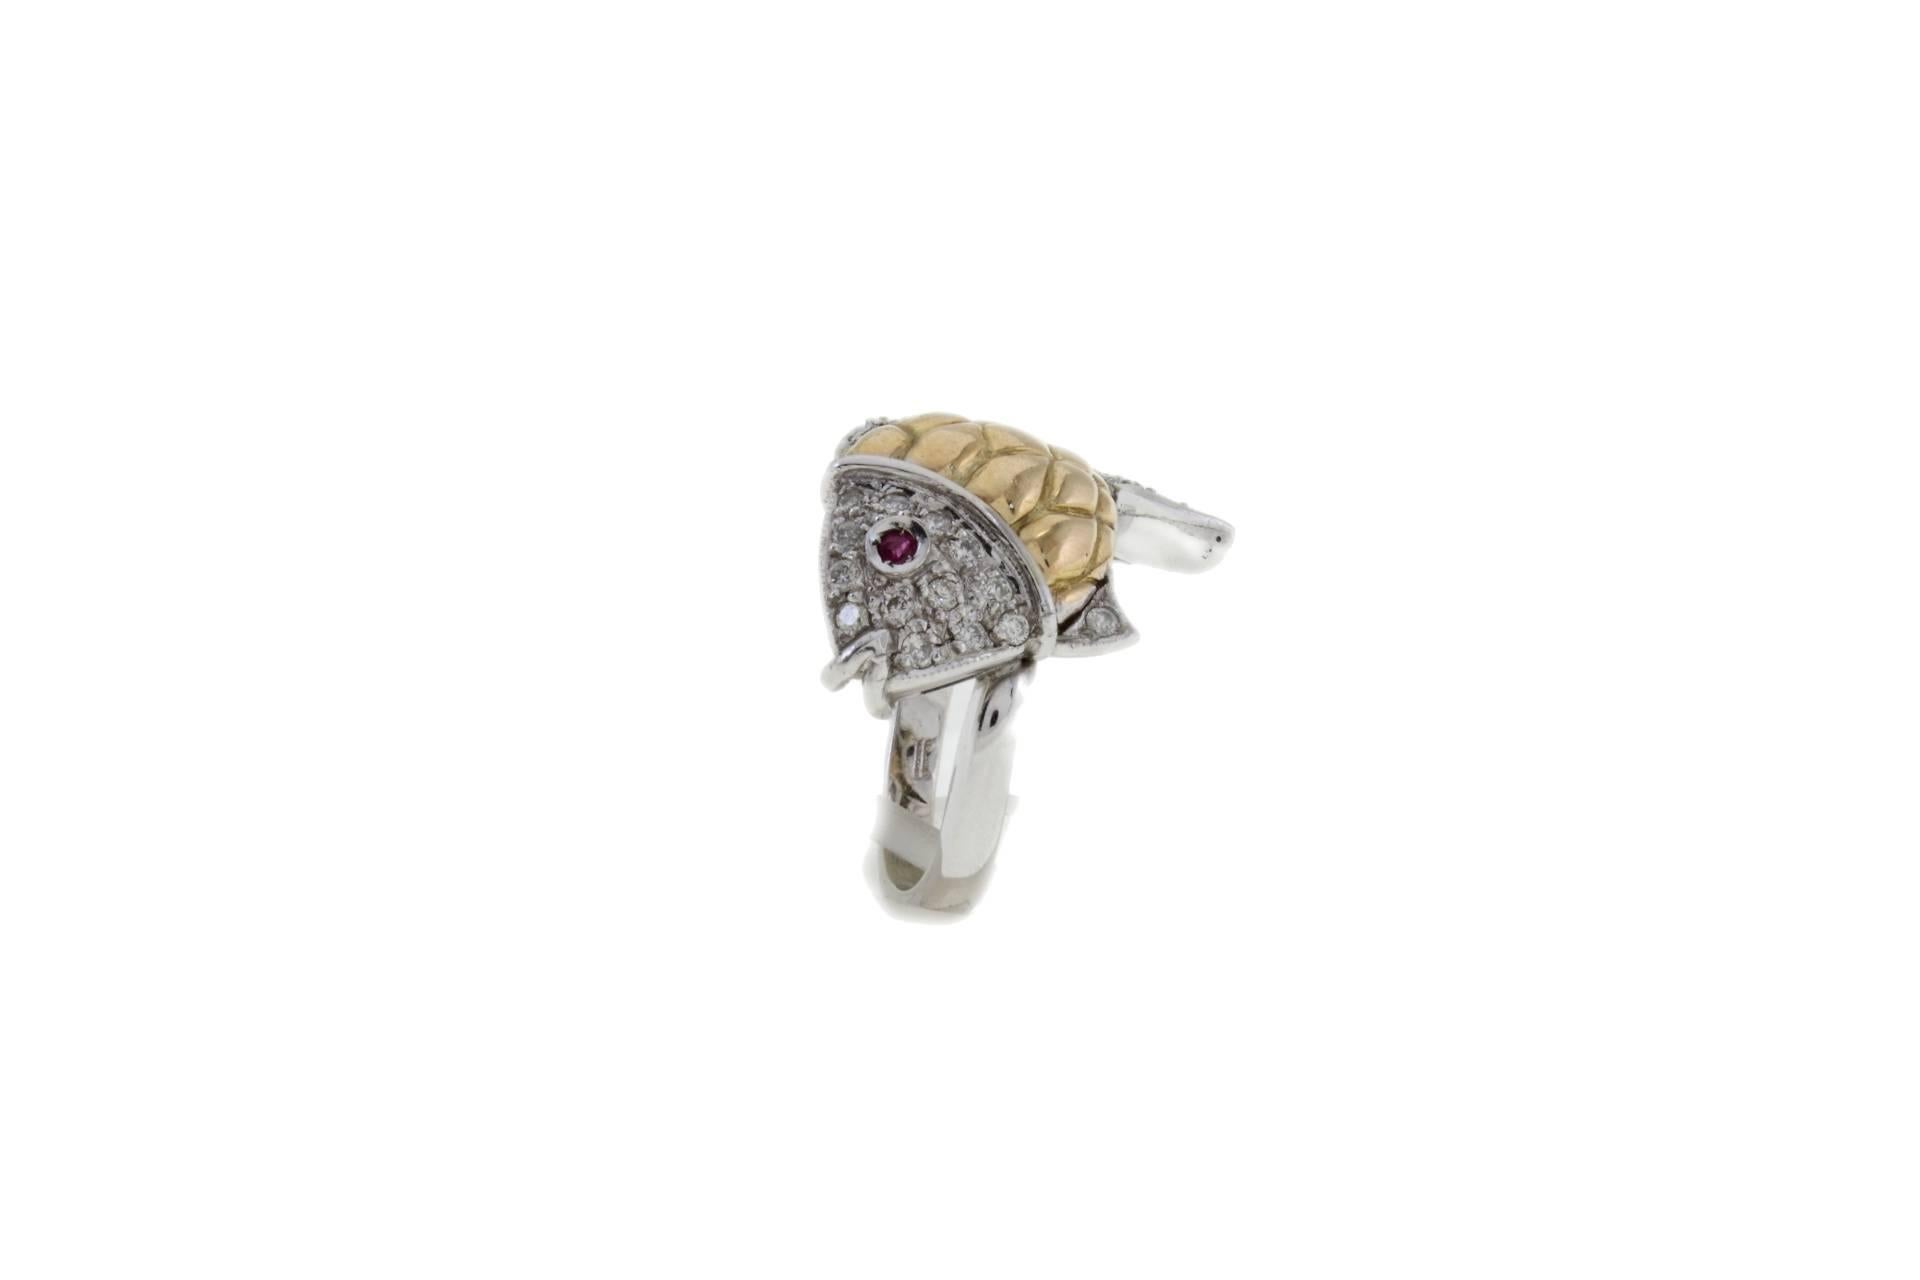 shipping policy: 
No additional costs will be added to this order.
Shipping costs will be totally covered by the seller (customs duties included). 

Fish shaped ring in 14k white and yellow gold mounted with diamonds on the body and one ruby as